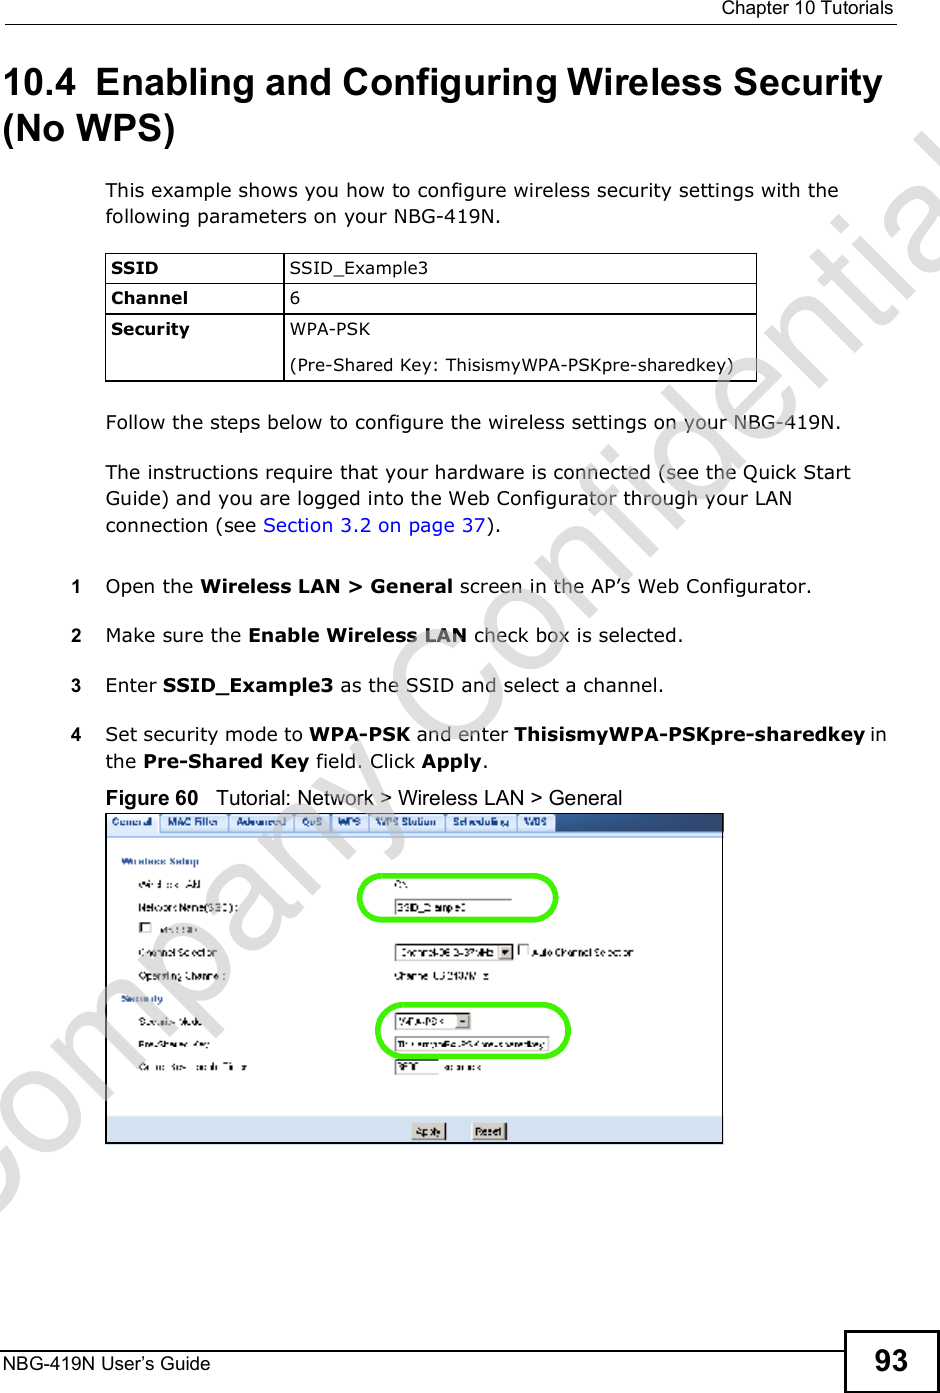  Chapter 10TutorialsNBG-419N User s Guide 9310.4  Enabling and Configuring Wireless Security (No WPS)This example shows you how to configure wireless security settings with the following parameters on your NBG-419N.Follow the steps below to configure the wireless settings on your NBG-419N.The instructions require that your hardware is connected (see the Quick Start Guide) and you are logged into the Web Configurator through your LAN connection (see Section 3.2 on page 37).1Open the Wireless LAN &gt; General screen in the AP!s Web Configurator.2Make sure the Enable Wireless LAN check box is selected.3Enter SSID_Example3 as the SSID and select a channel.4Set security mode to WPA-PSK and enter ThisismyWPA-PSKpre-sharedkey in the Pre-Shared Key field. Click Apply.Figure 60   Tutorial: Network &gt; Wireless LAN &gt; GeneralSSID SSID_Example3Channel 6Security  WPA-PSK(Pre-Shared Key: ThisismyWPA-PSKpre-sharedkey)Company Confidential